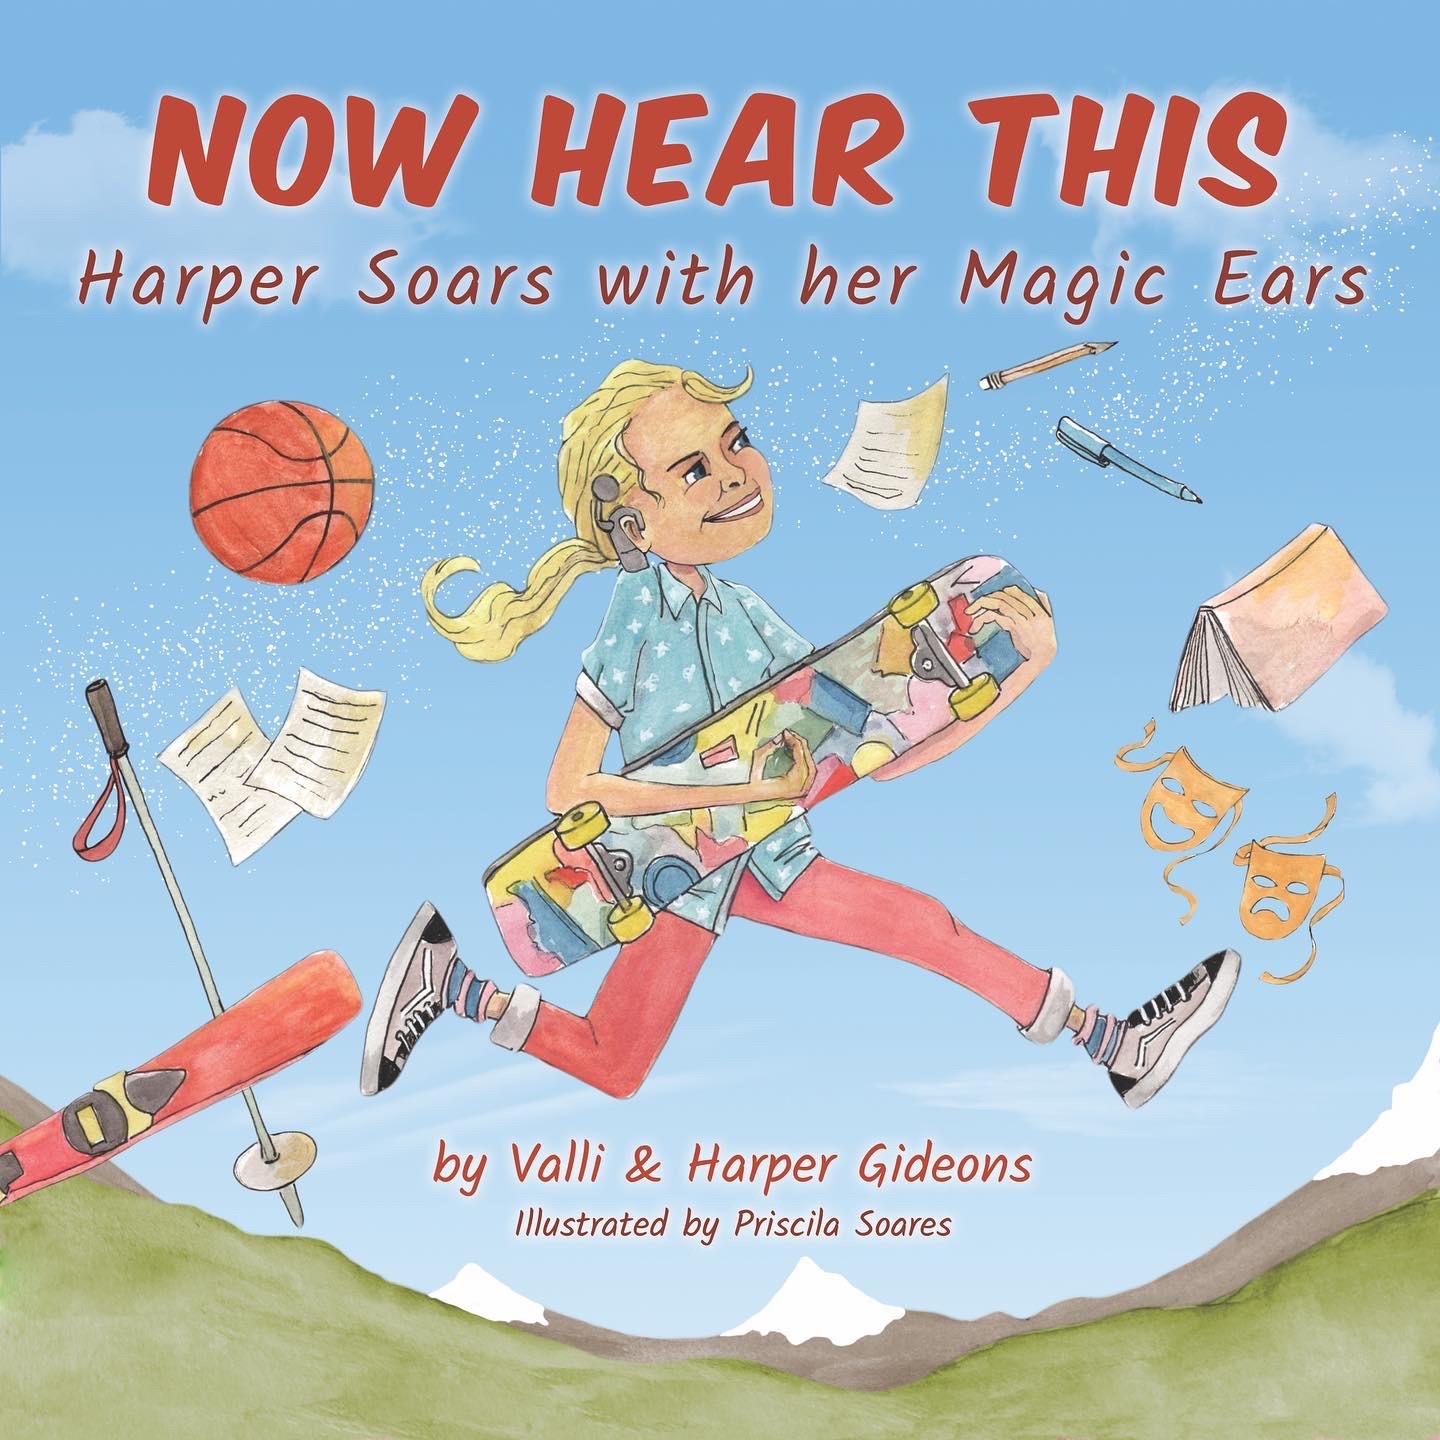 Harper's book cover about hearing loss